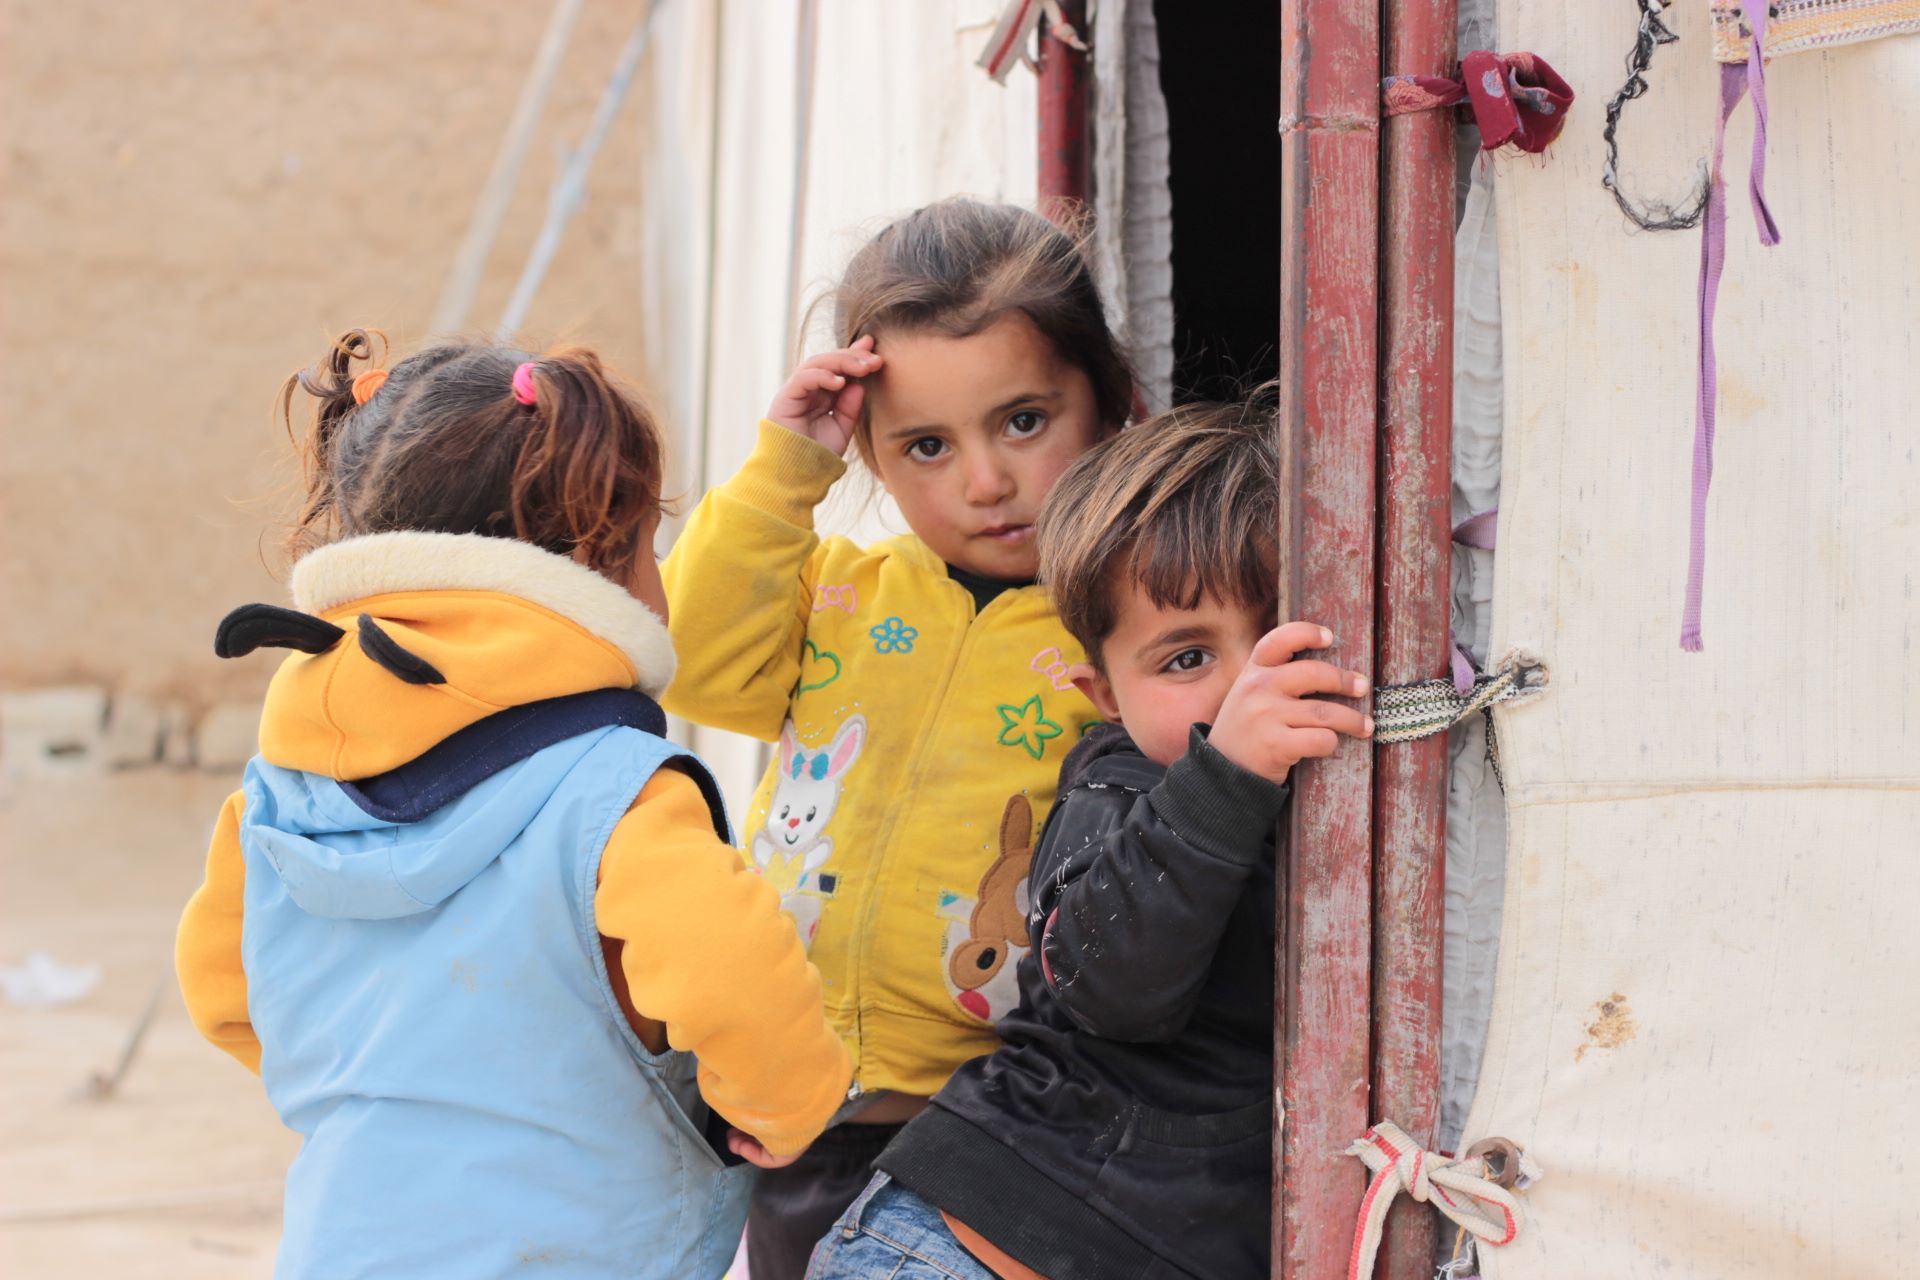 Three children (two girls, one boy) of preschool age are standing at a tent shelter. One of the girls is facing the camera, the other girl turns her back to it. The boy is facing the camera and half hides in the door frame.